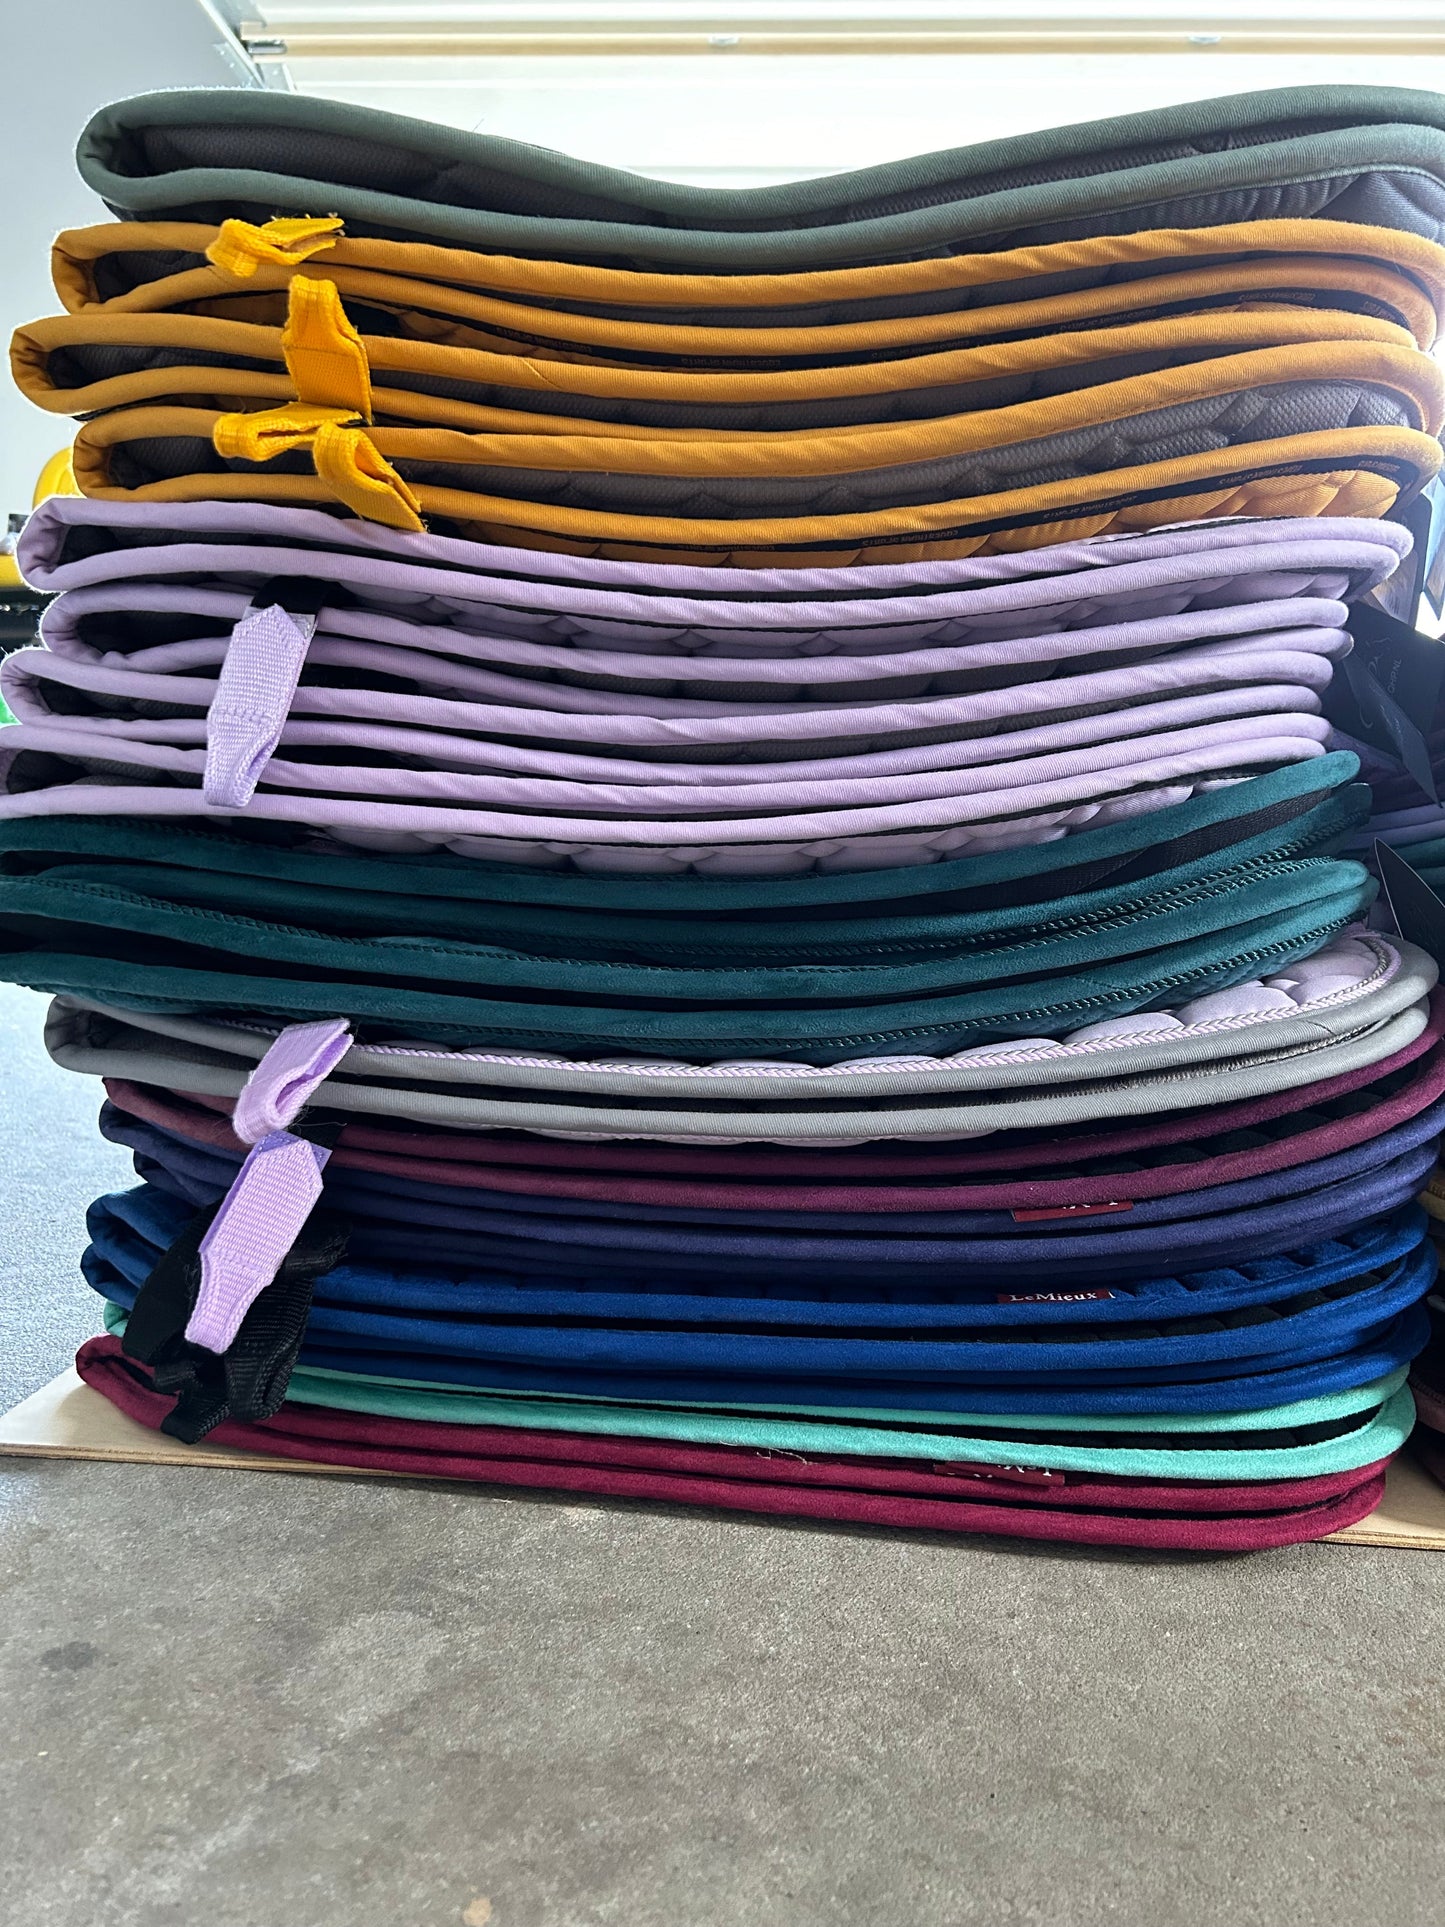 Mystery Saddle Pad Sale - All Purpose SOLD OUT